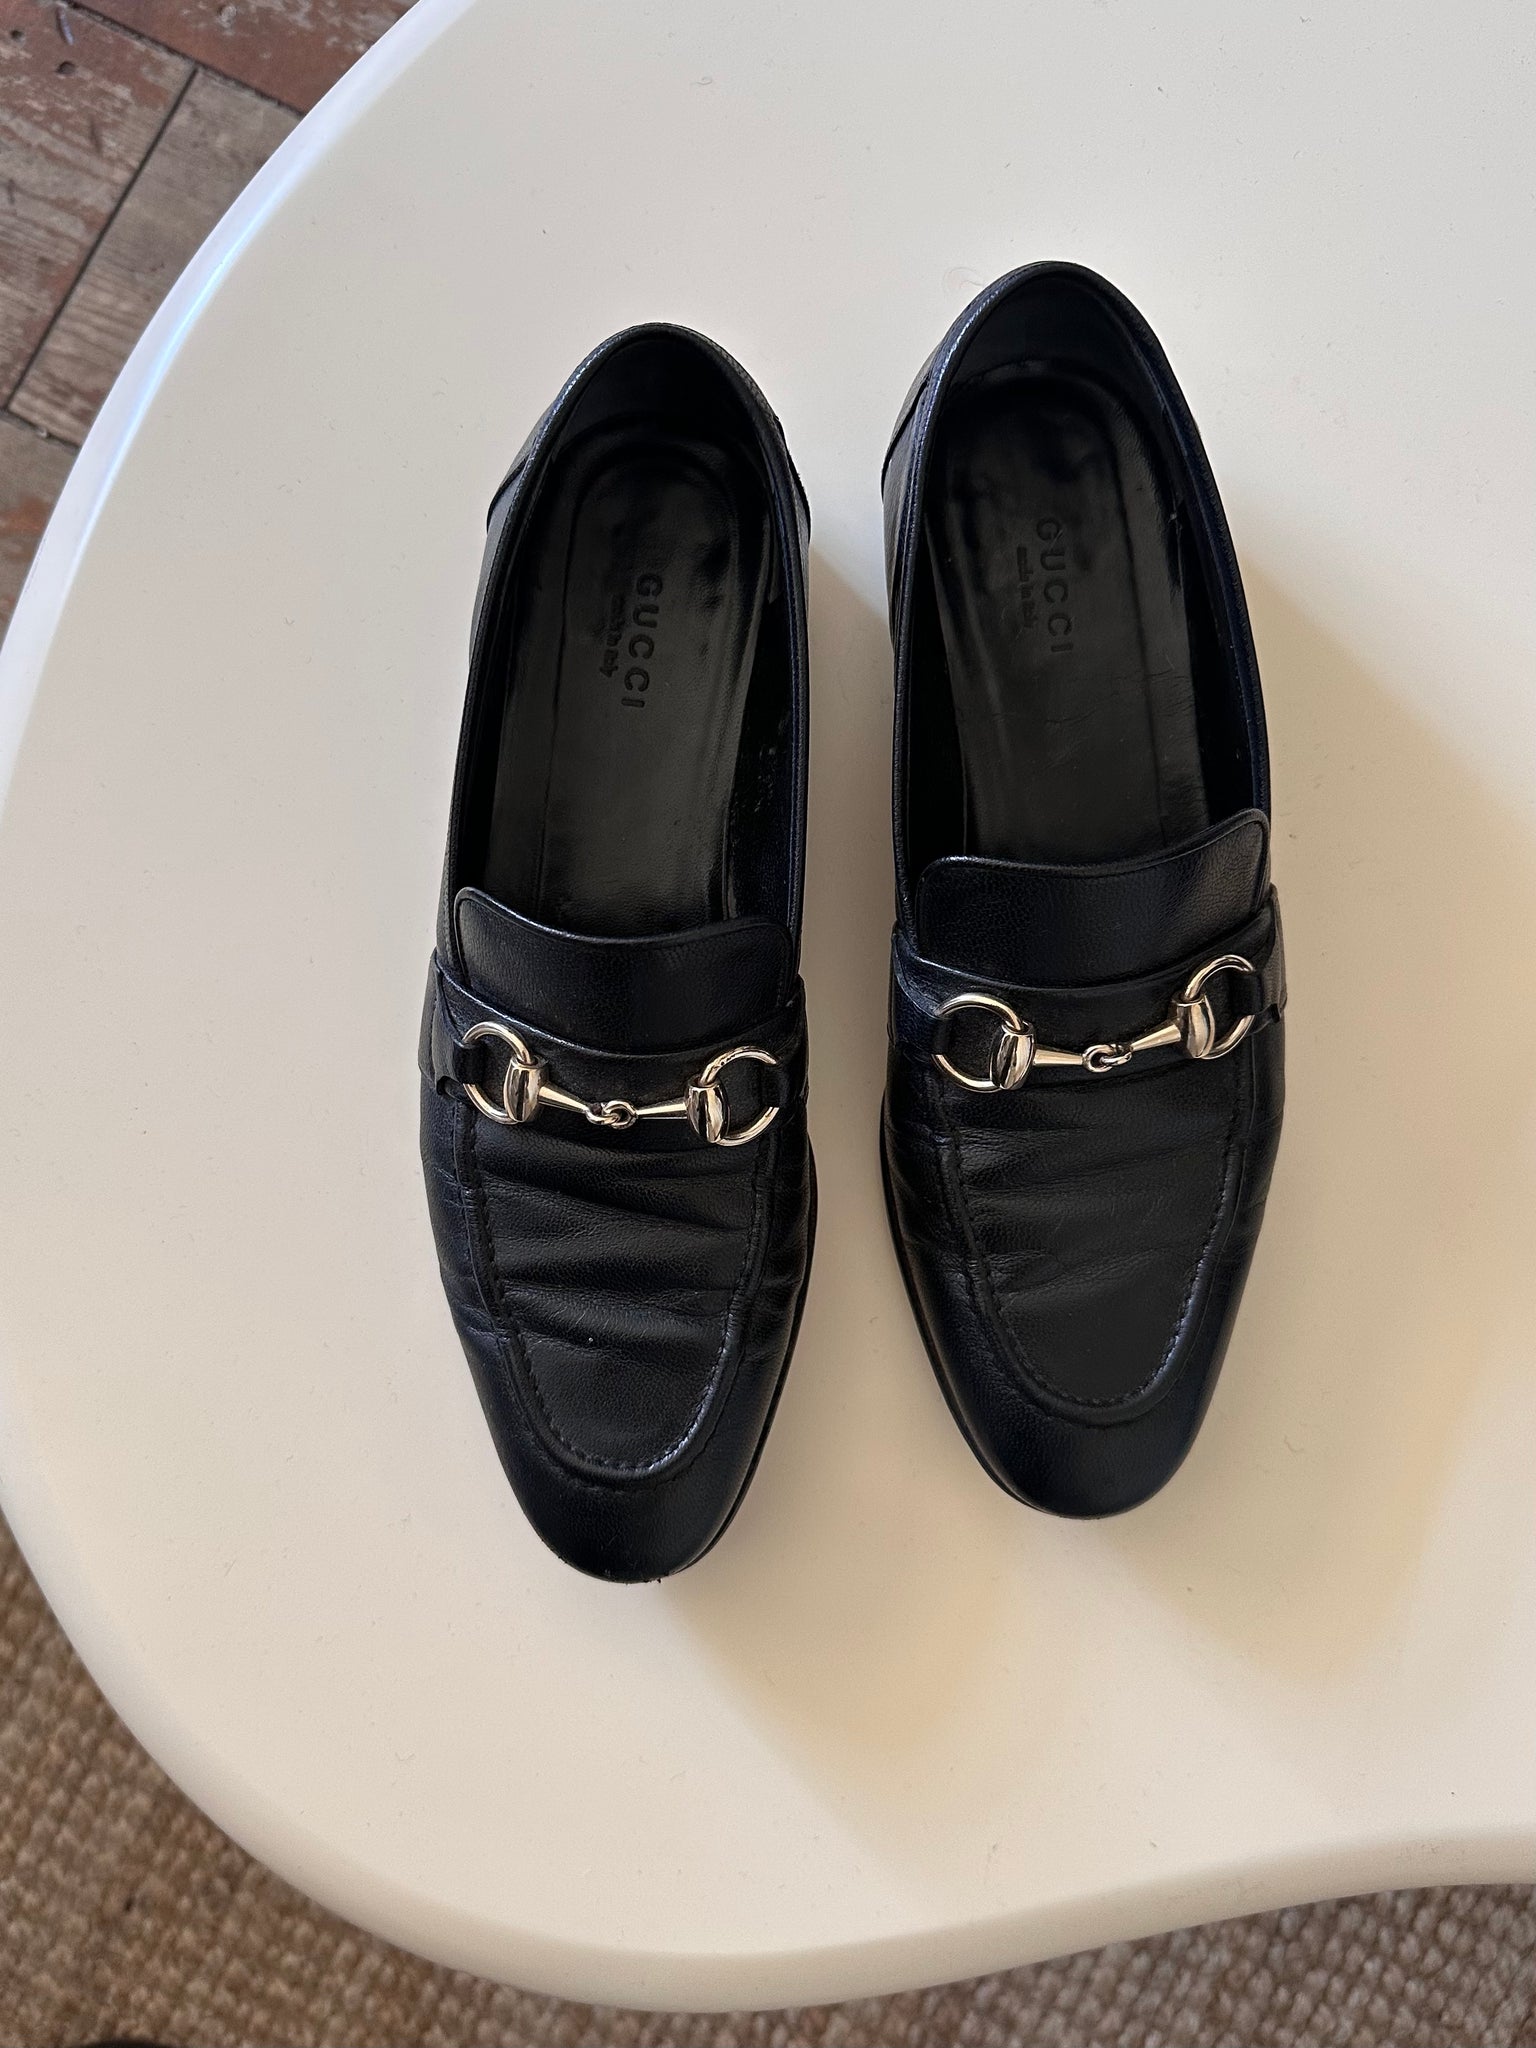 Vintage Gucci Loafers (size 7)